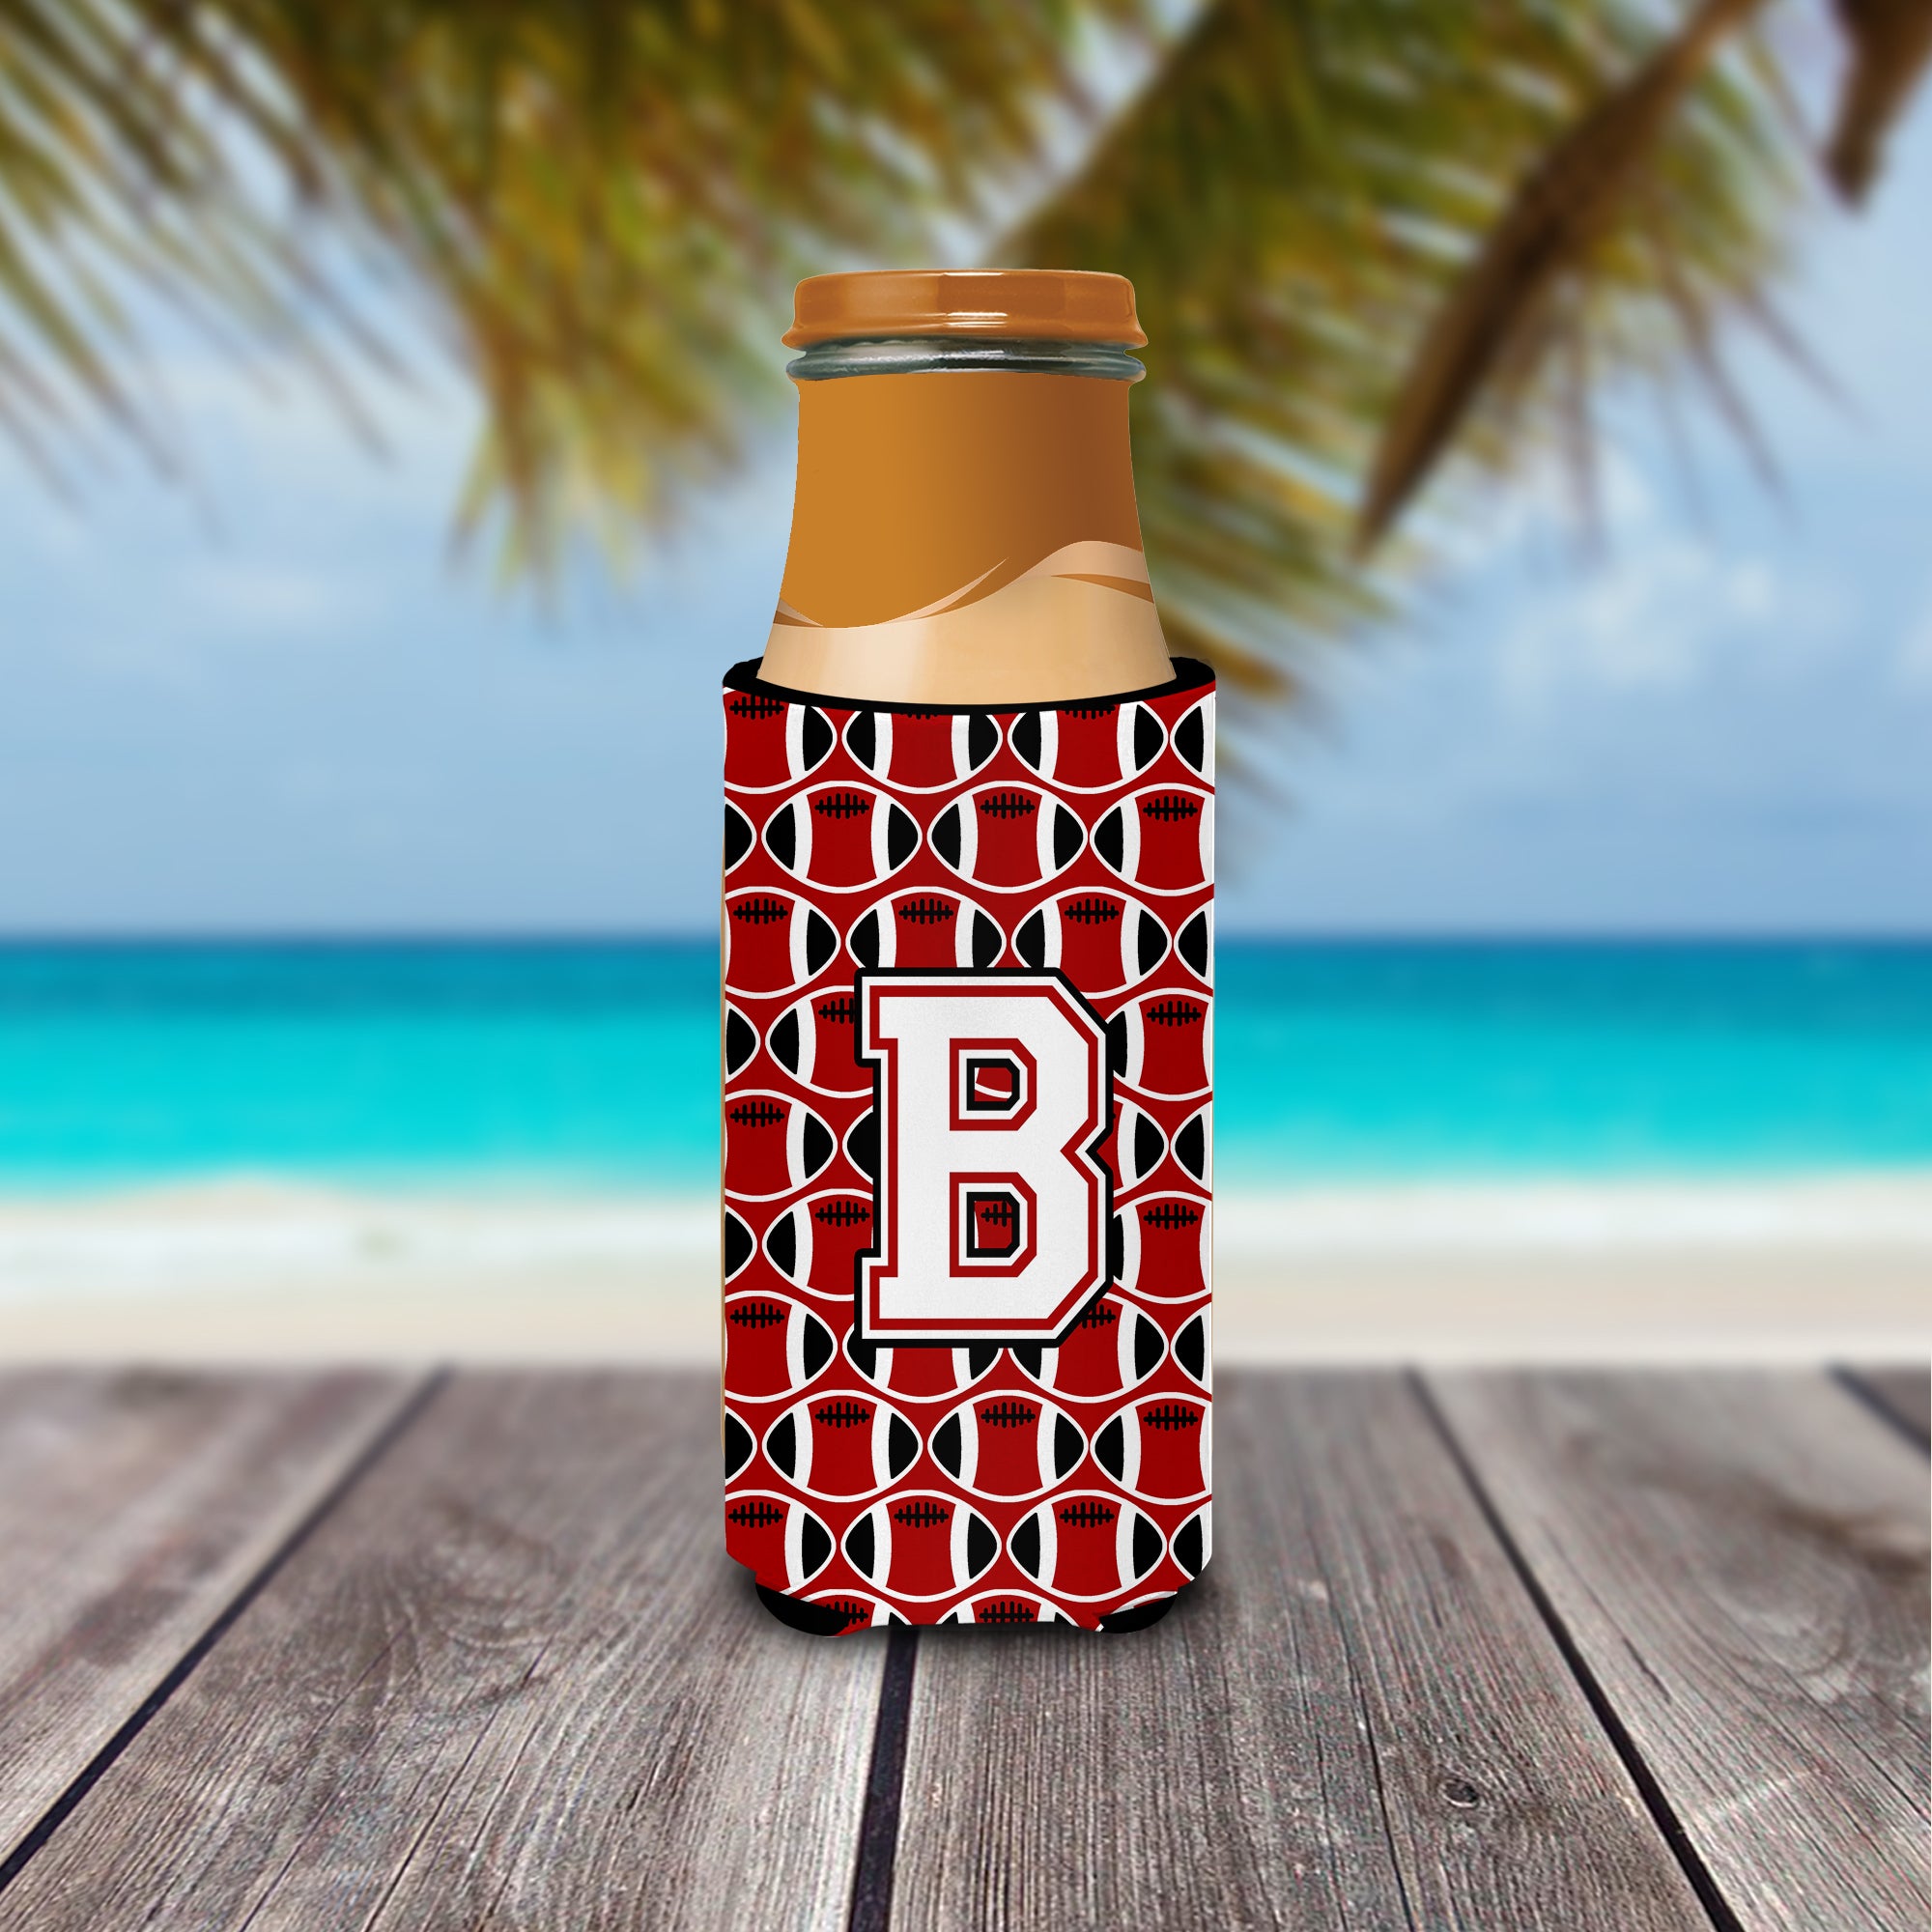 Letter B Football Cardinal and White Ultra Beverage Insulators for slim cans CJ1082-BMUK